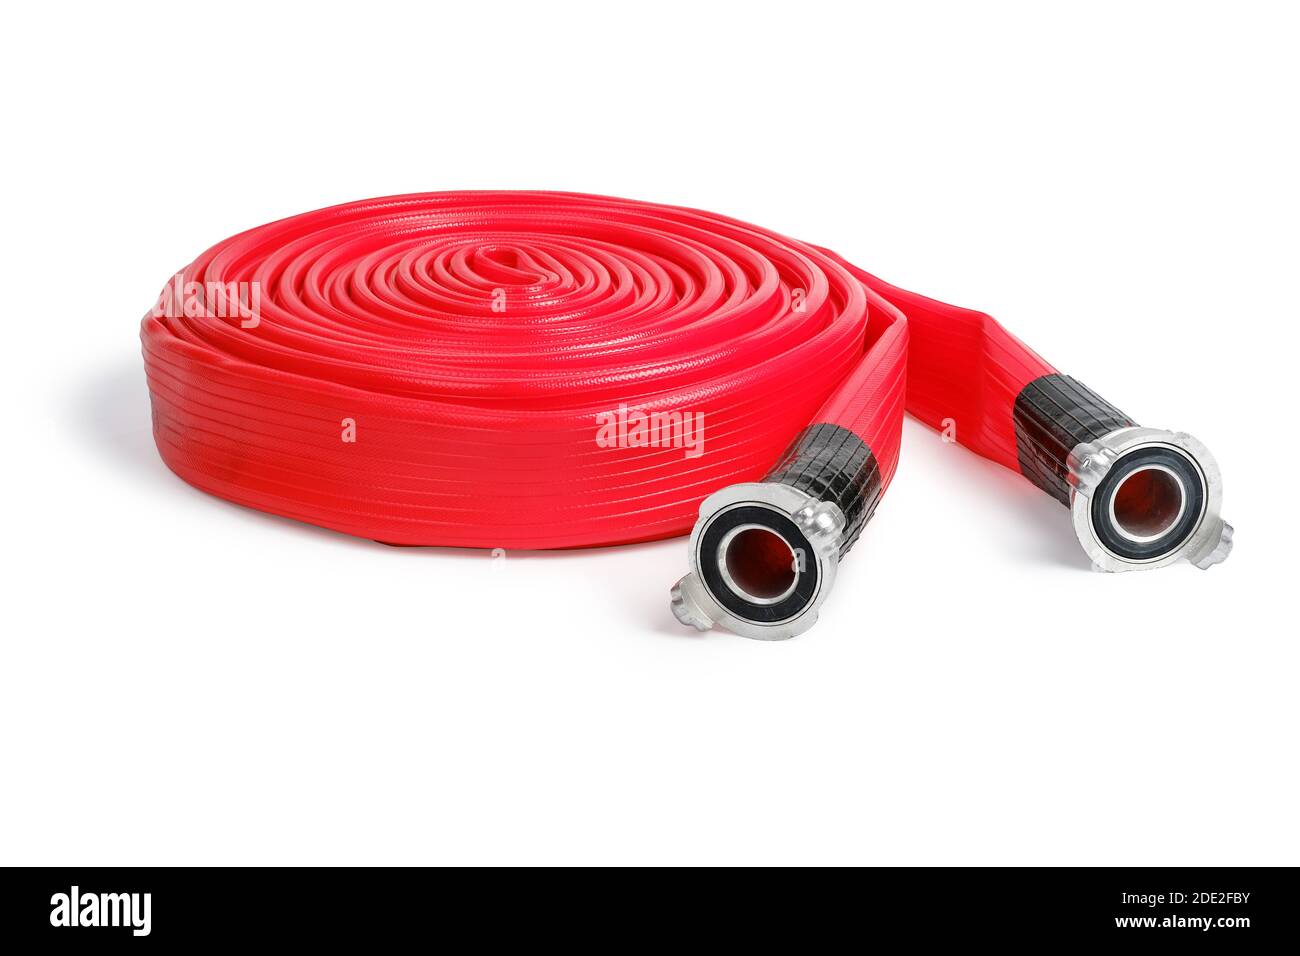 https://c8.alamy.com/comp/2DE2FBY/red-firefighter-hose-isolated-on-the-white-background-2DE2FBY.jpg